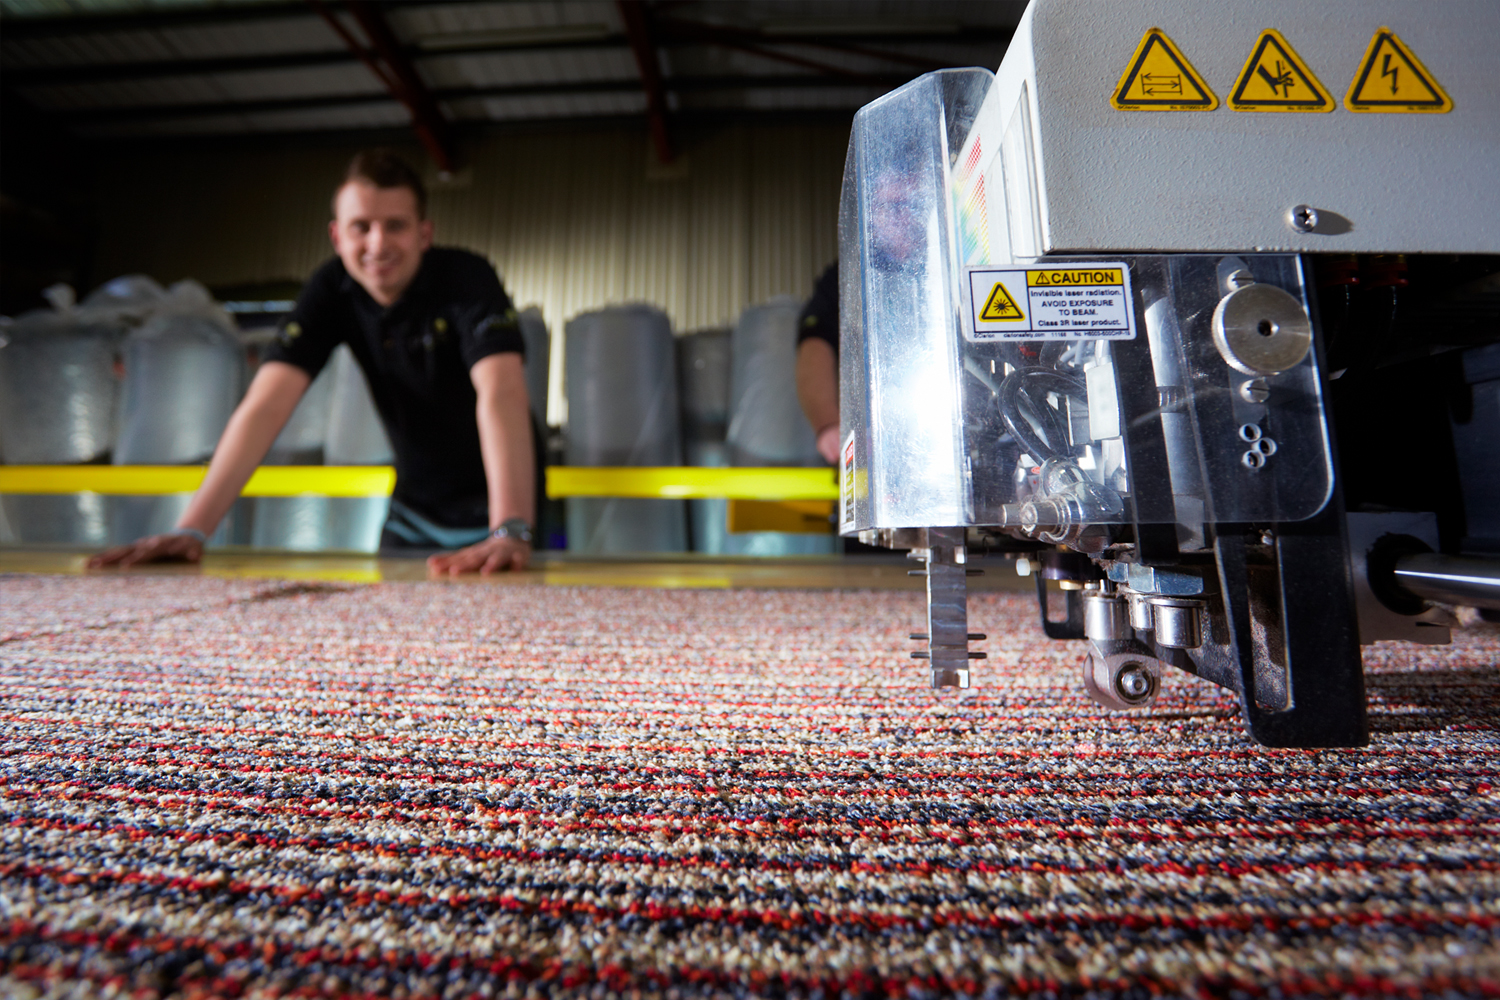 Cutting carpet with man in background out of focus